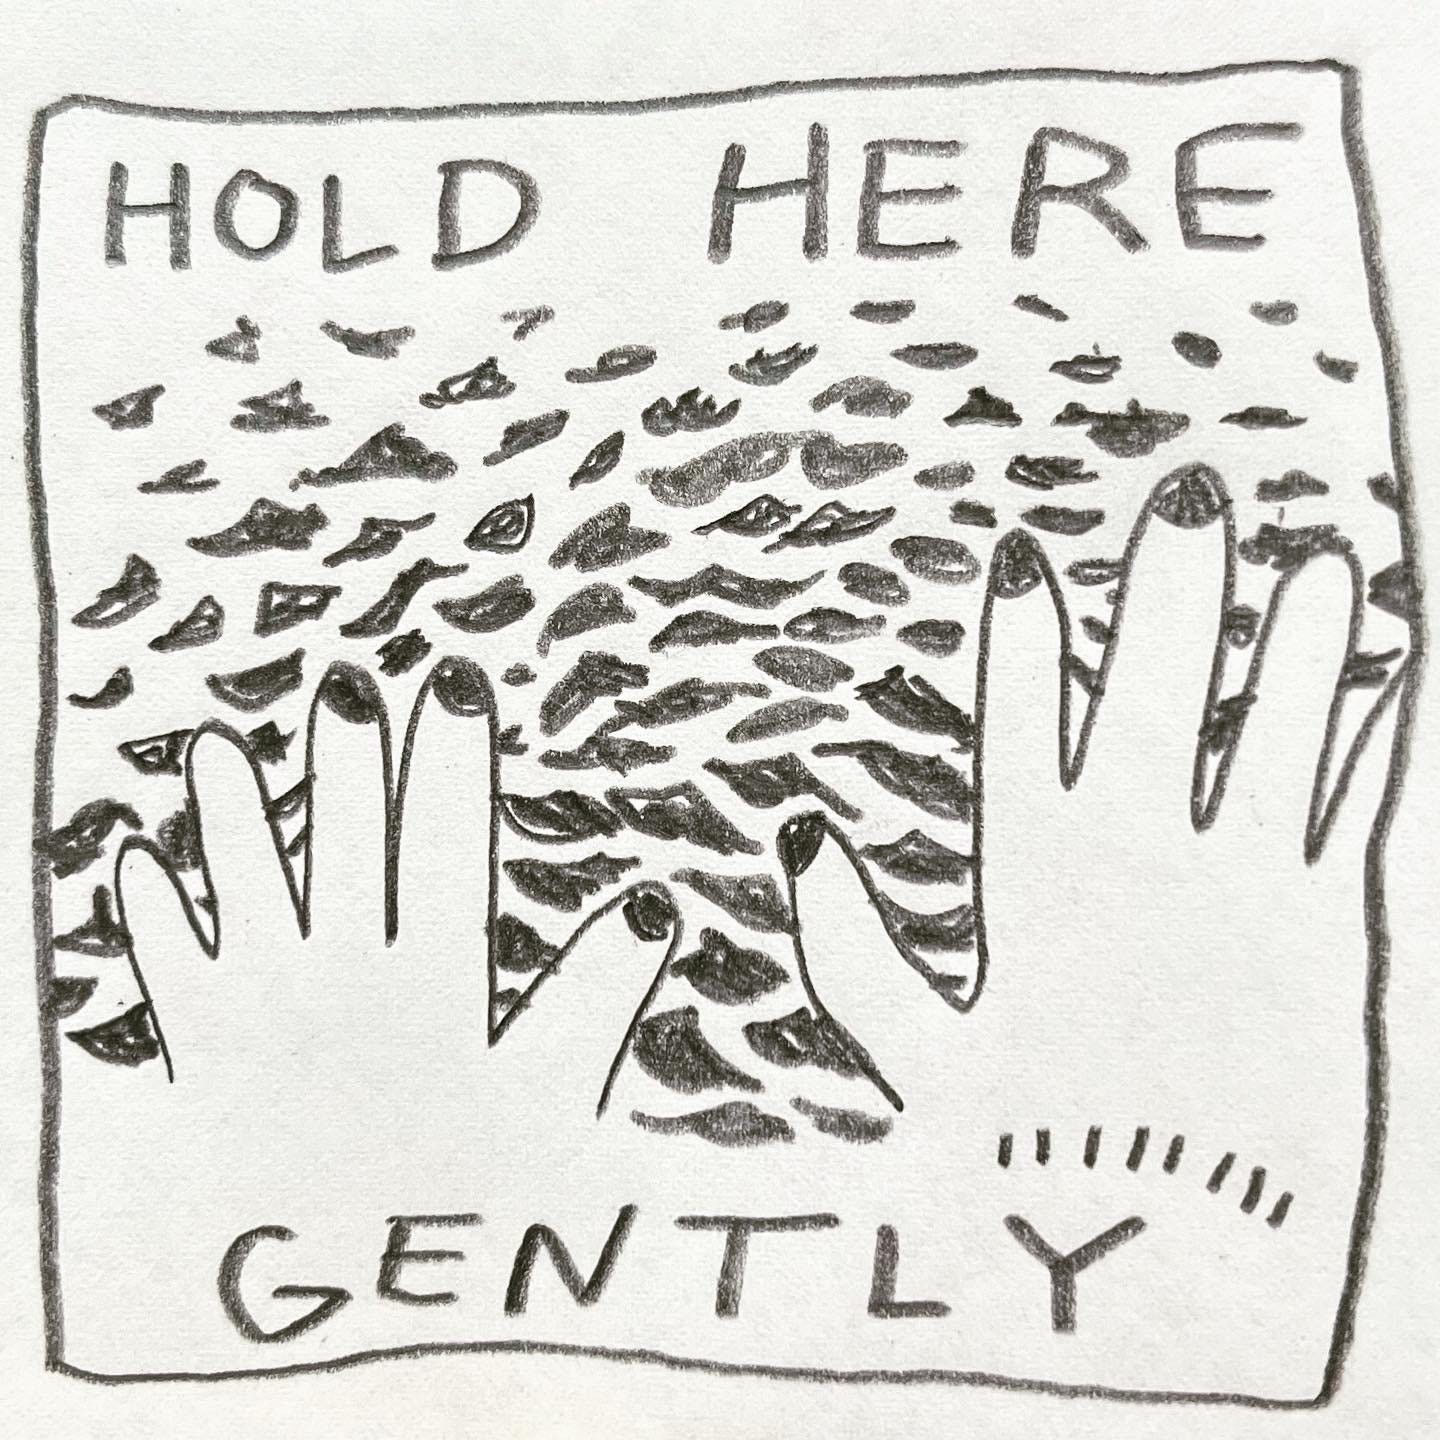 Panel 5: hold here gently Image: we see the back of Lark's gloved hands from their perspective. Both hands are held out, fingers spread, with the rippling surface of the lake behind them.